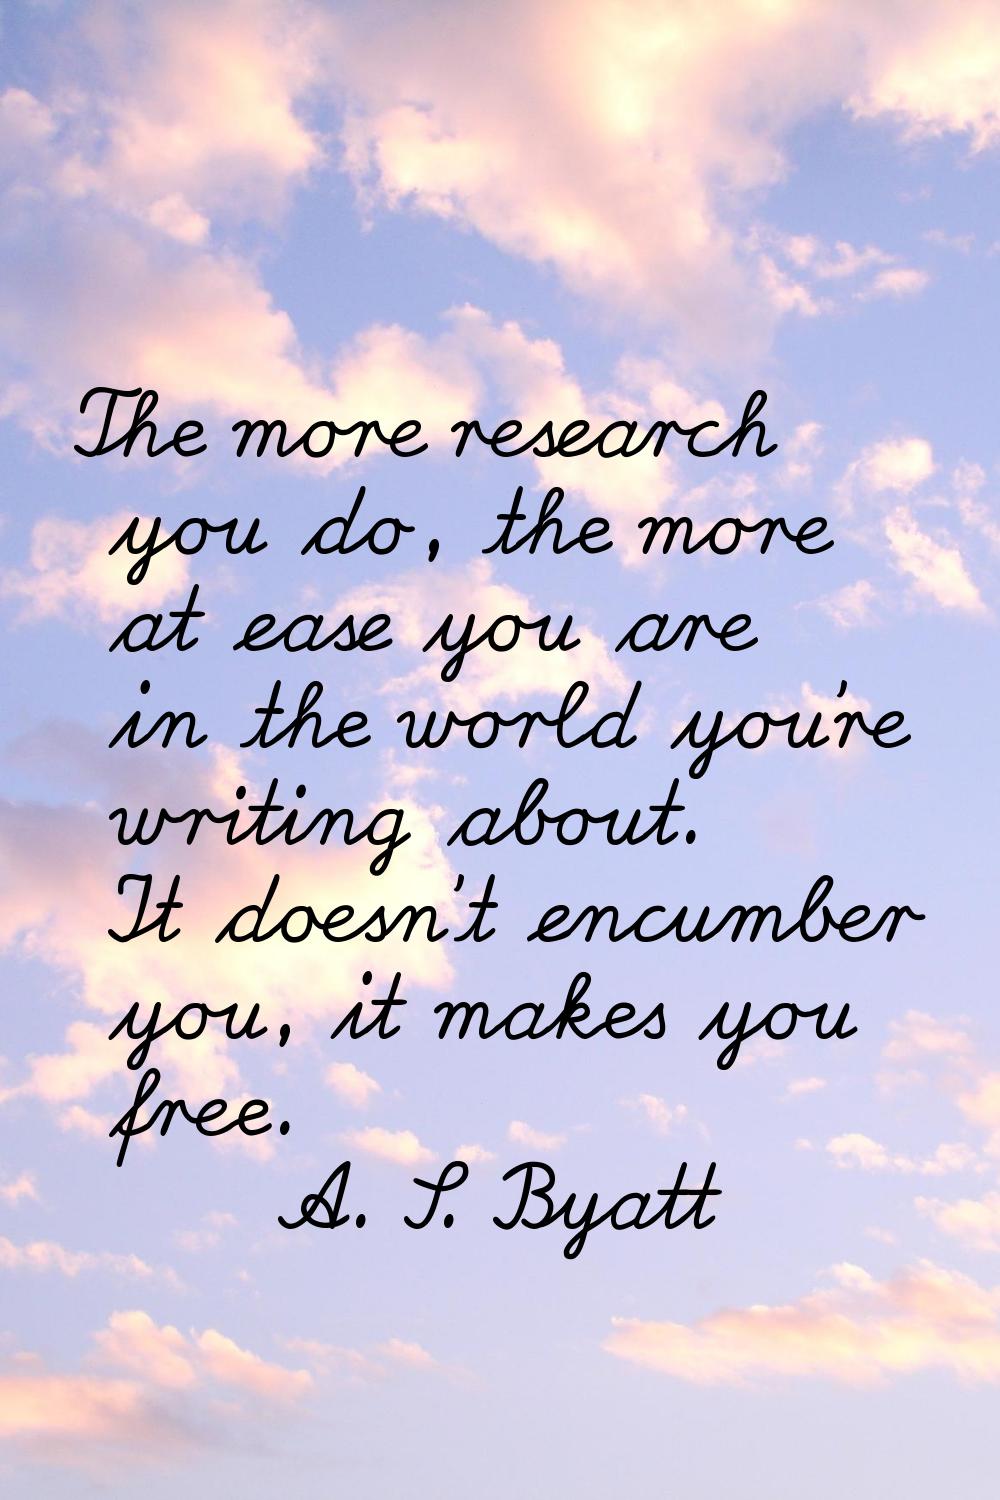 The more research you do, the more at ease you are in the world you're writing about. It doesn't en